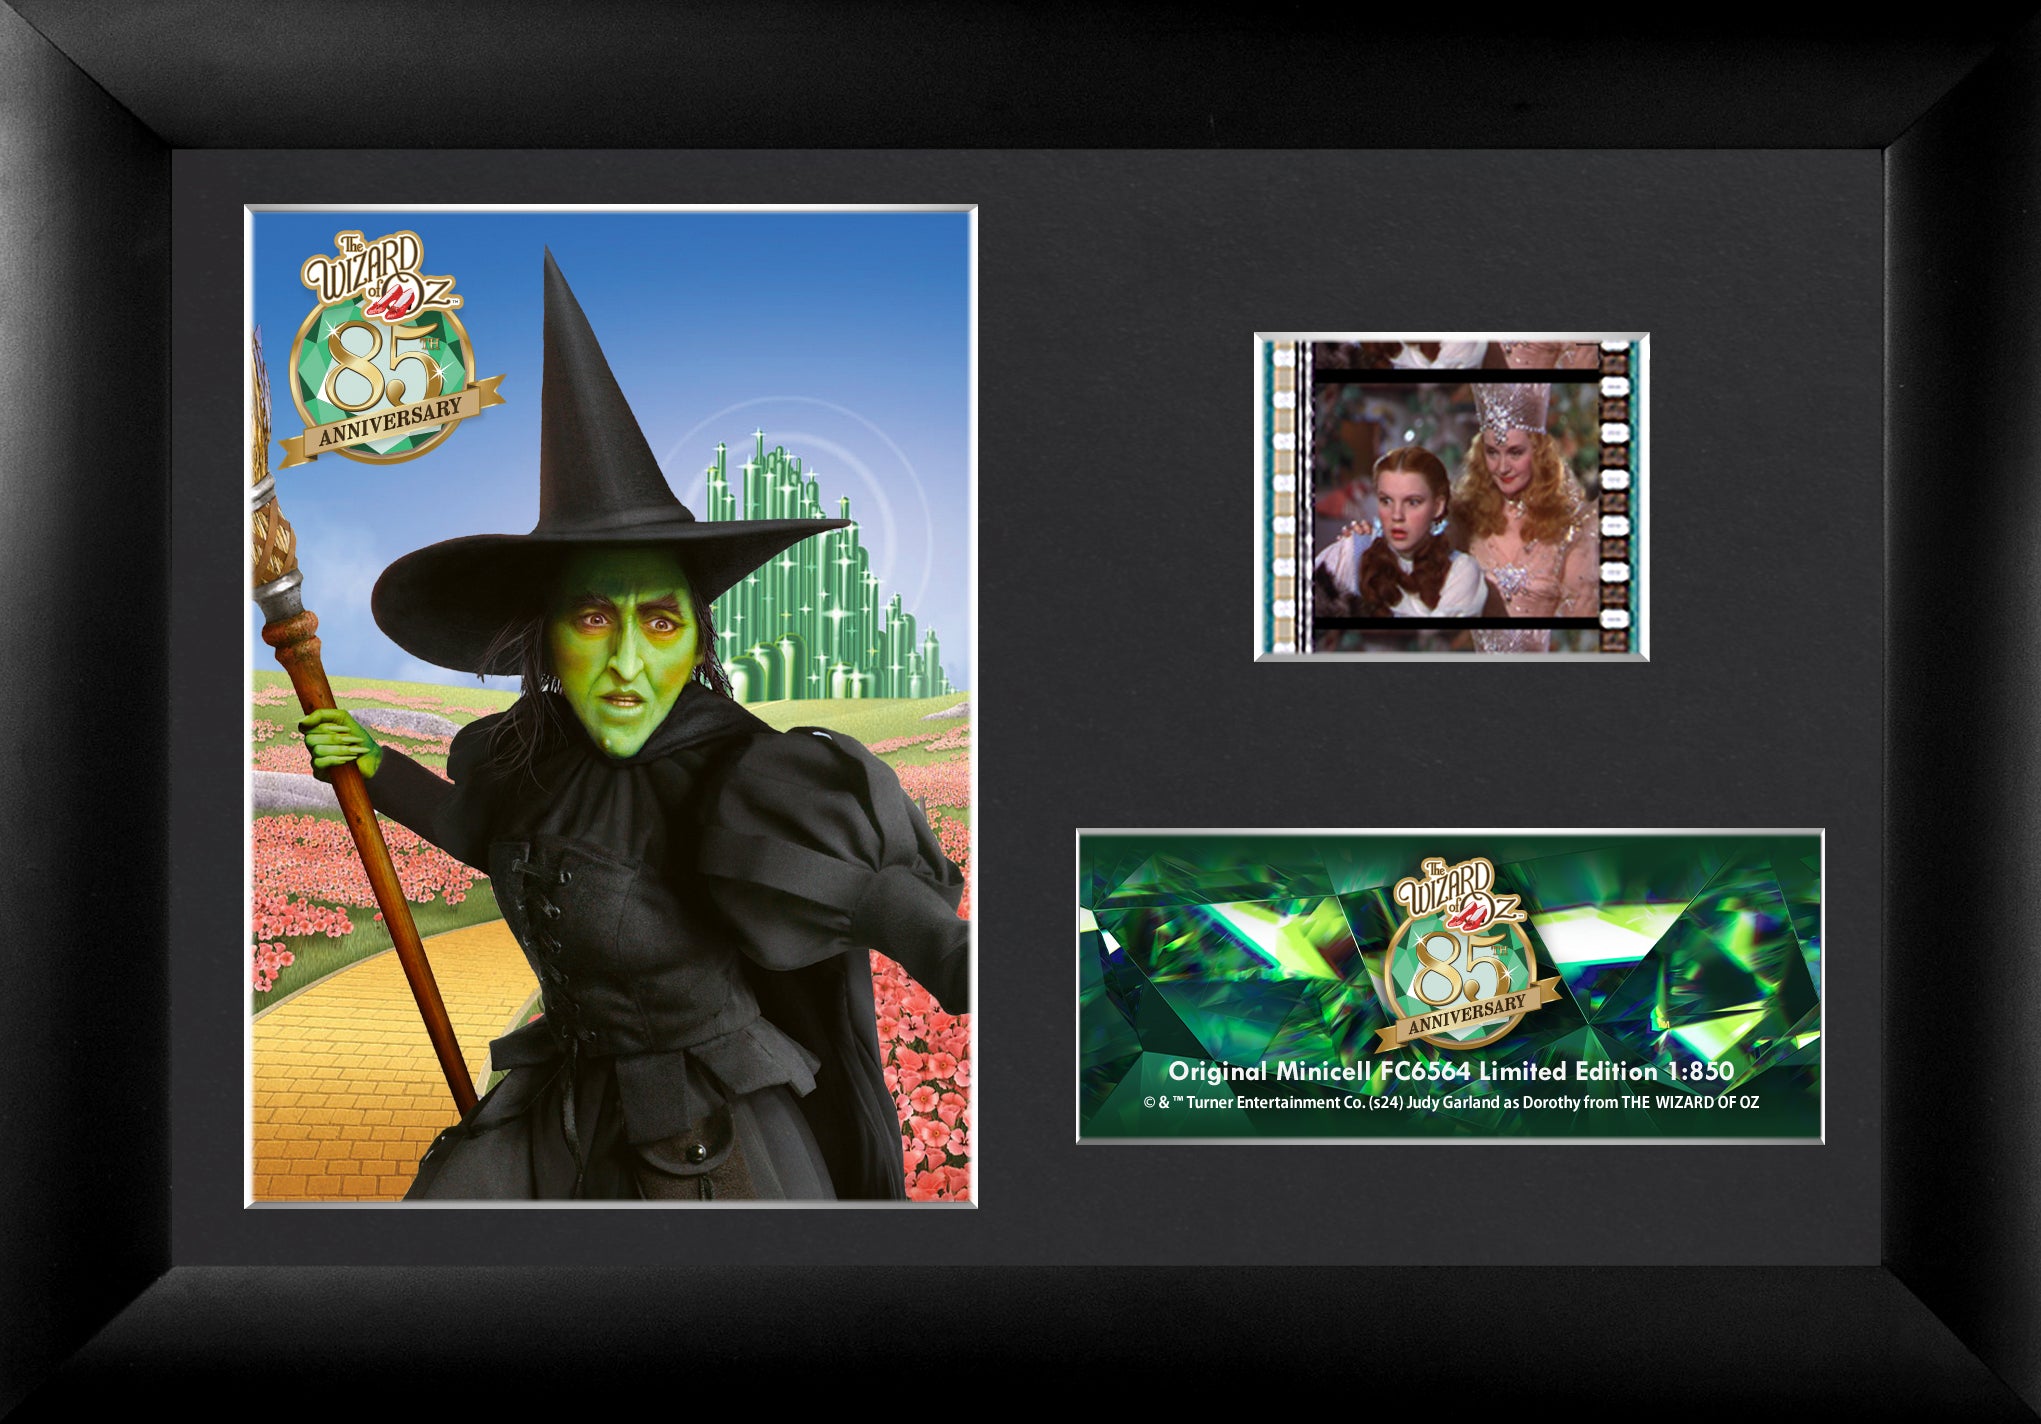 The Wizard of Oz (85th Anniversary – The Wicked Witch of the West) Minicell FilmCells Framed Desktop Presentation USFC6564